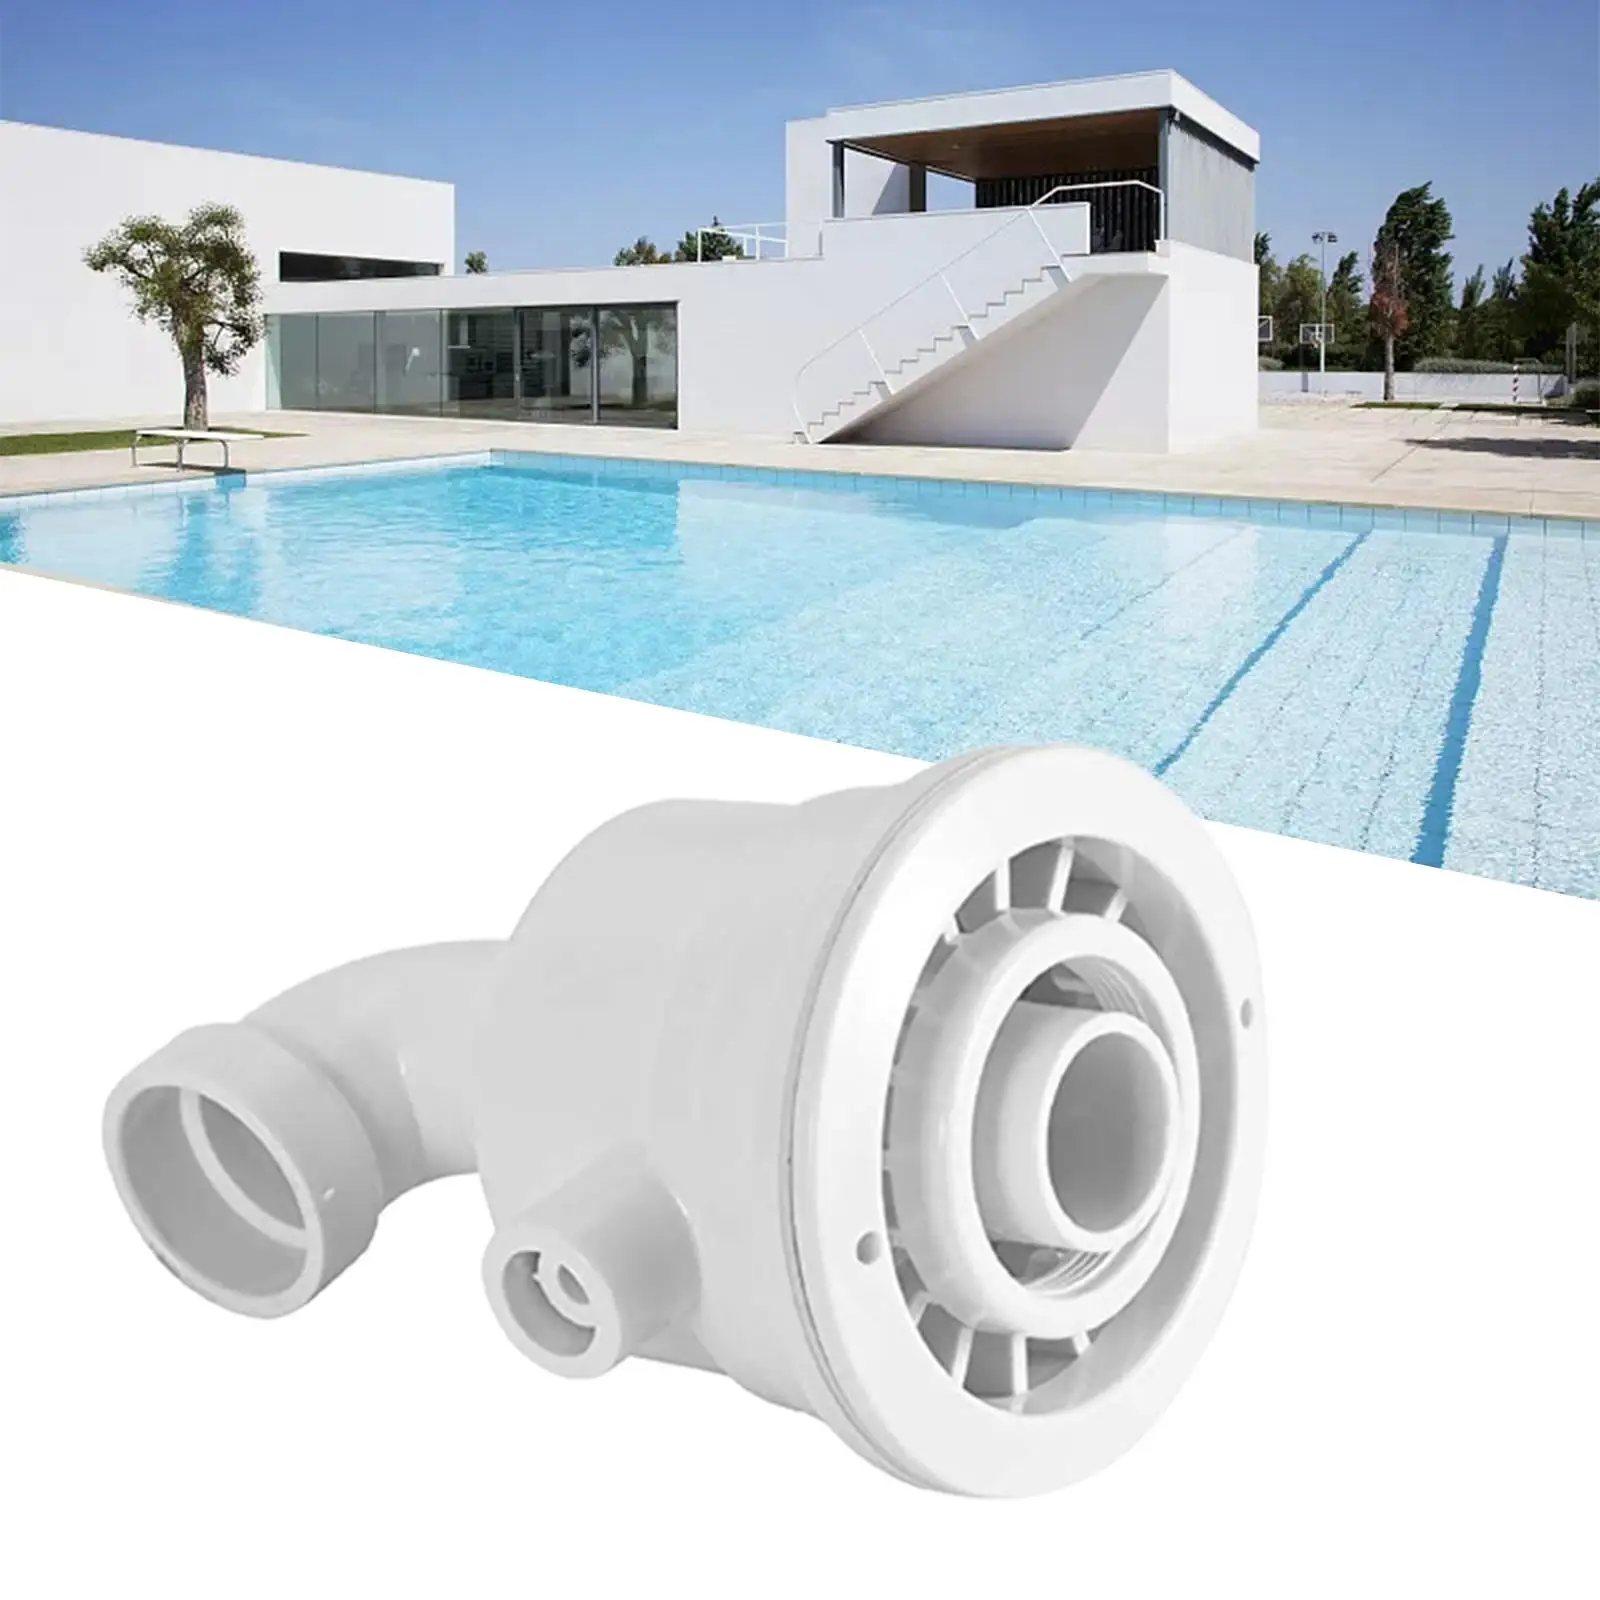 pool jets Flow Inlet 360° Rotatable Adjustable Massage Jet Nozzle for above Ground Hot tubs in ground SPA Pool Accessories